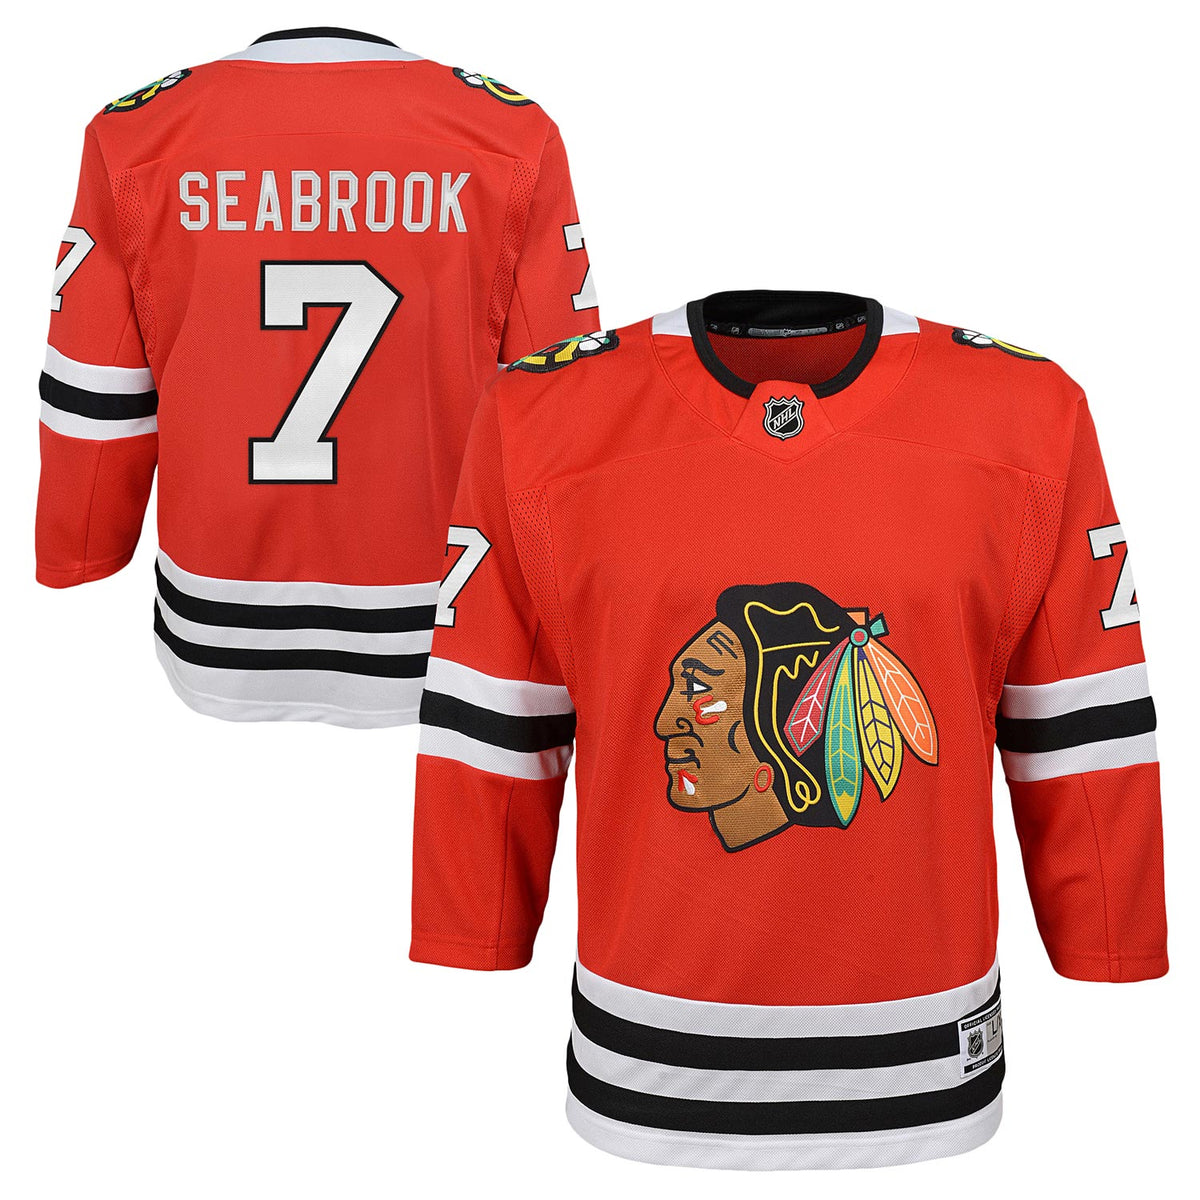 Chicago Blackhawks #7 Brent Seabrook Green Jersey on sale,for  Cheap,wholesale from China